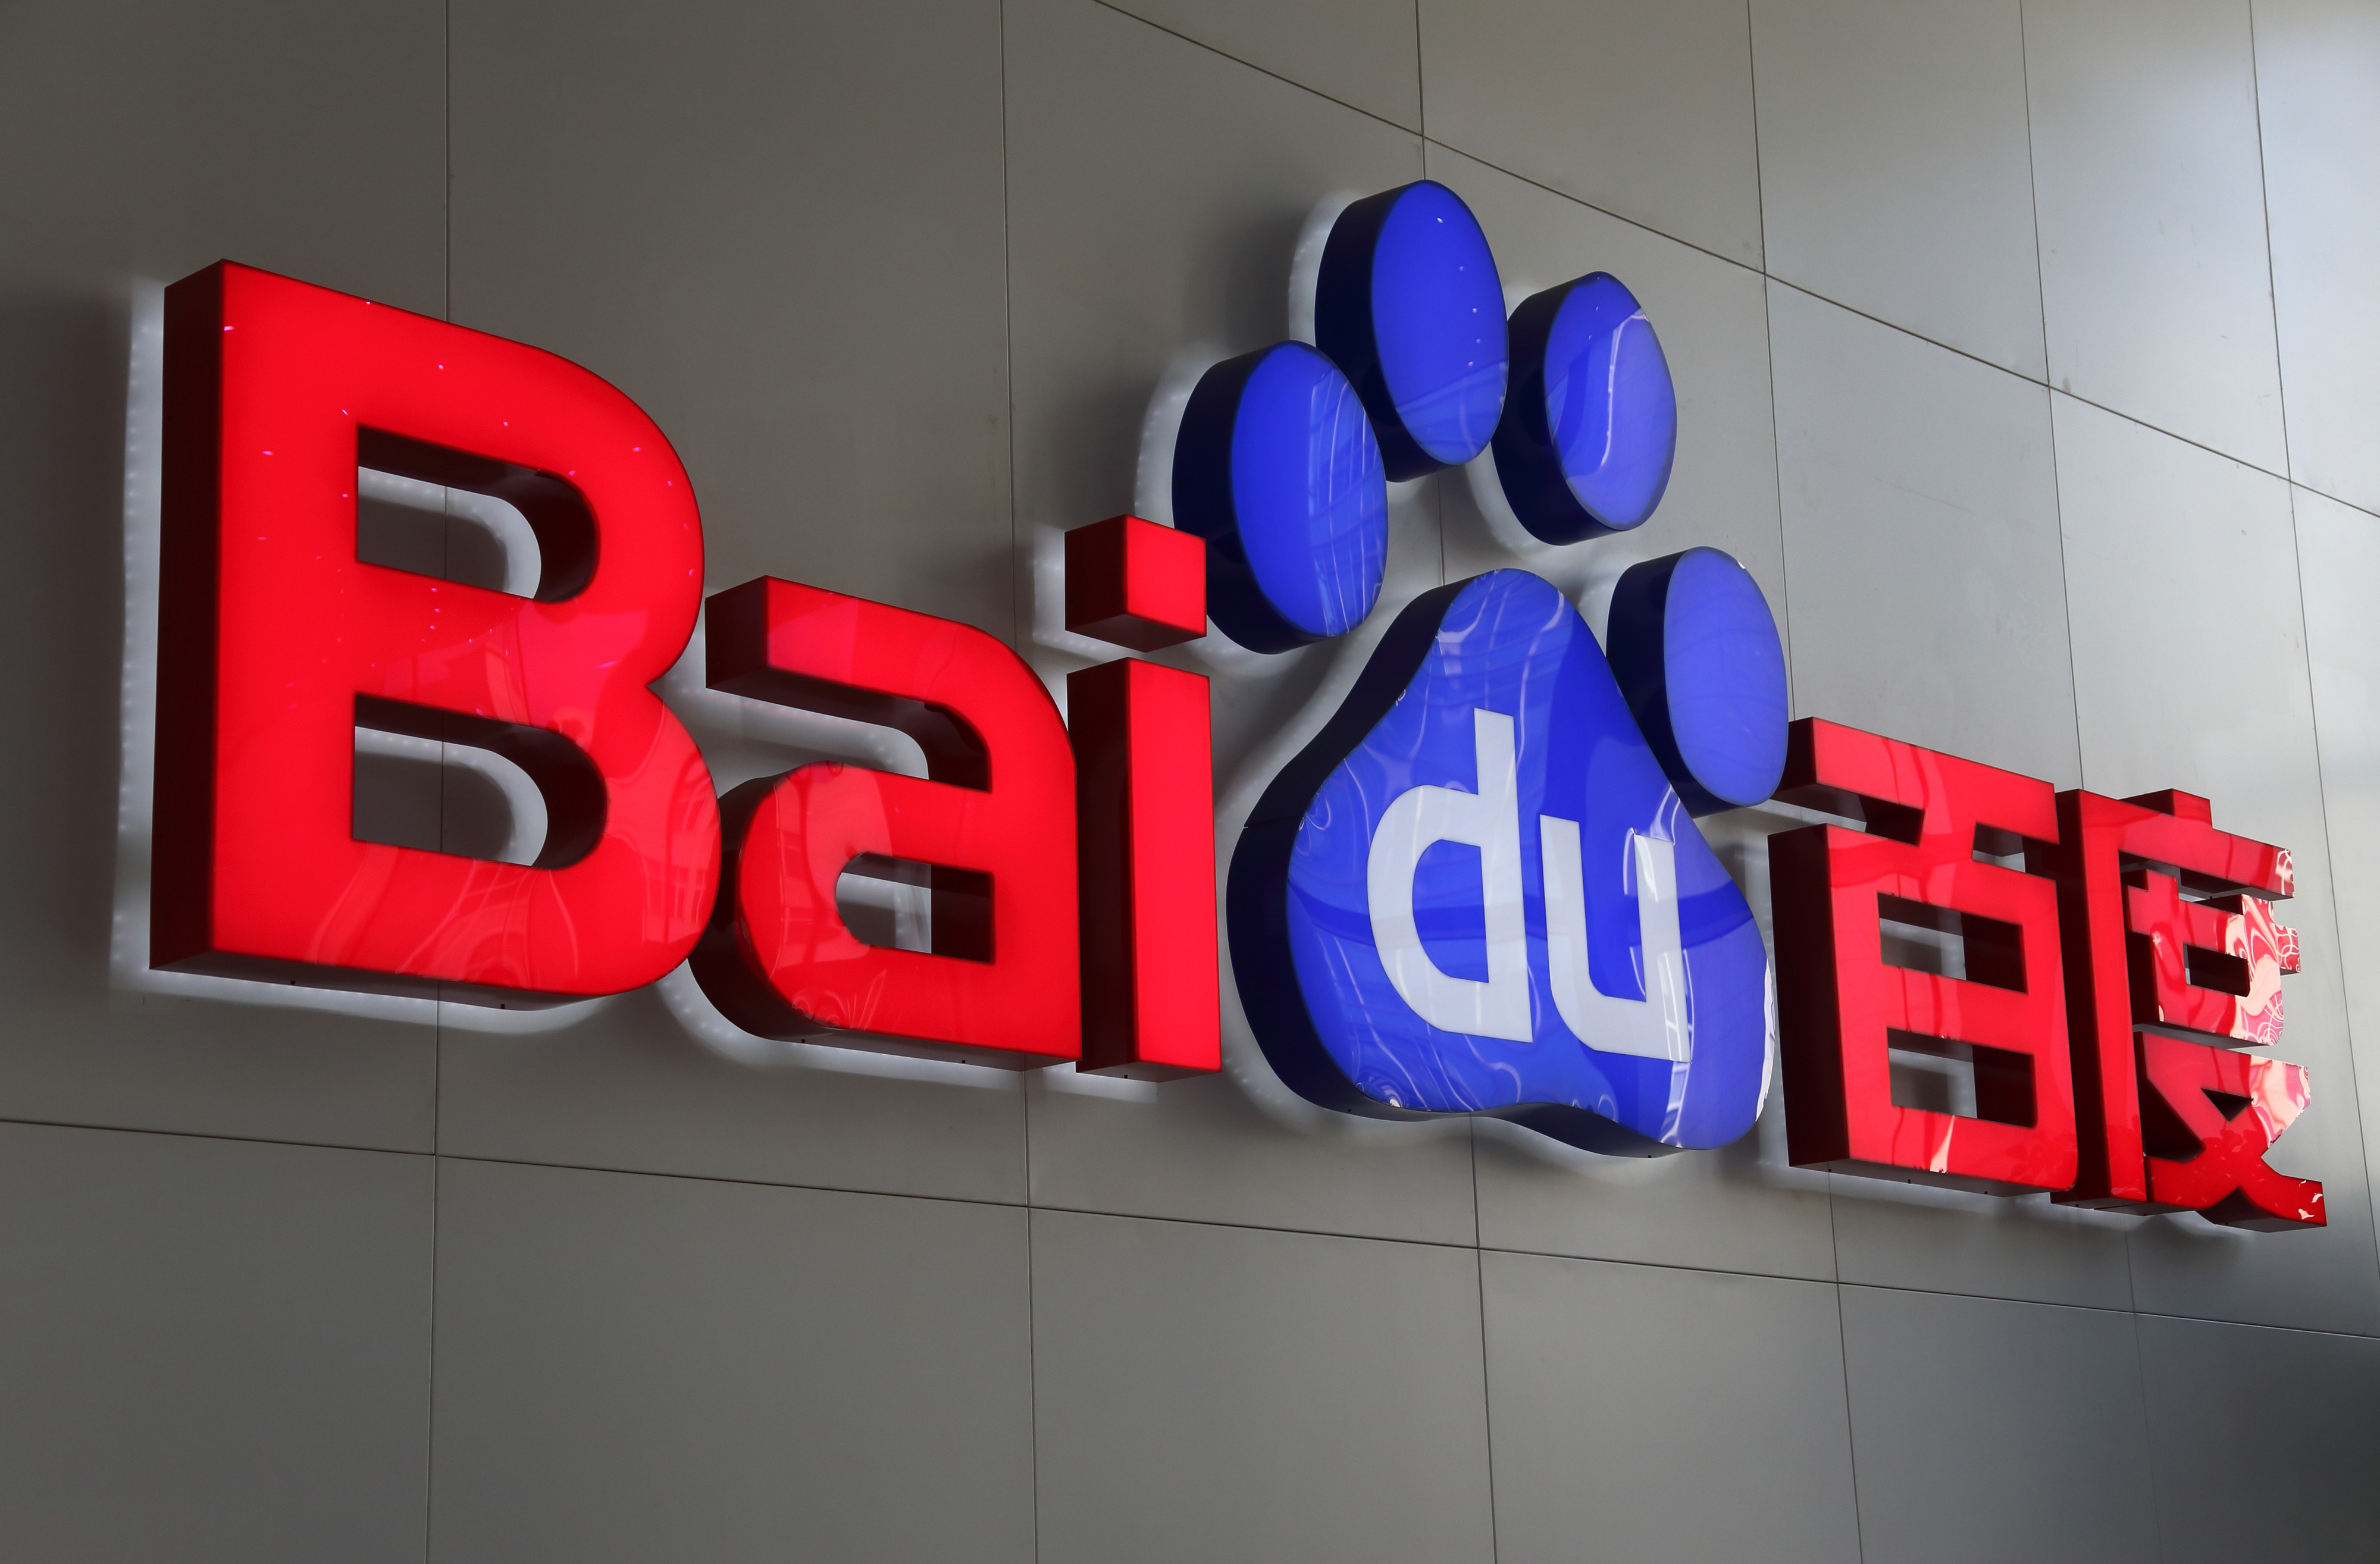 Baidu teams up with BlackBerry on self-driving and connected car tech